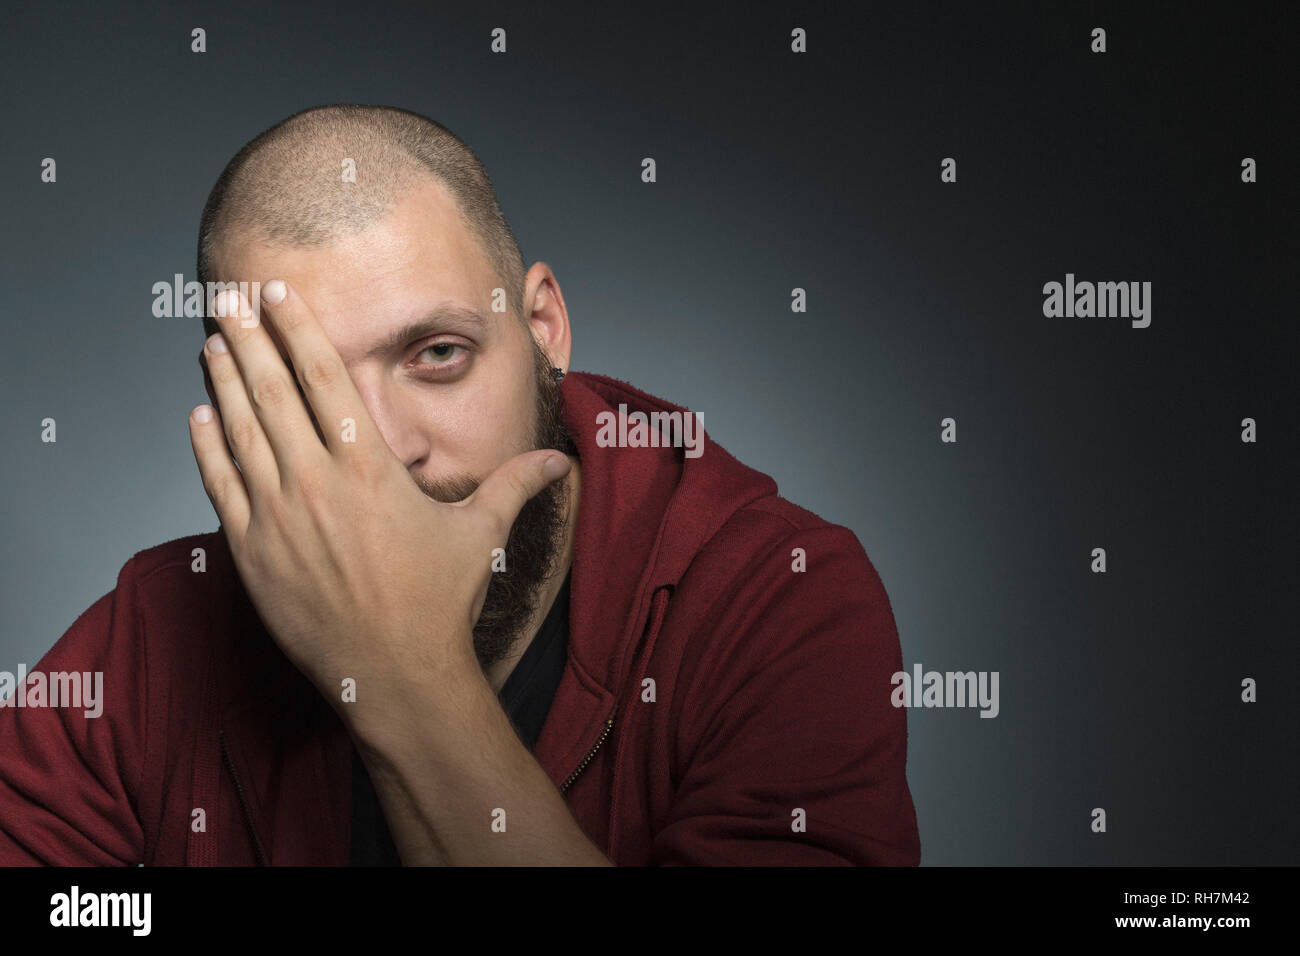 Portrait man covering face with hand Stock Photo